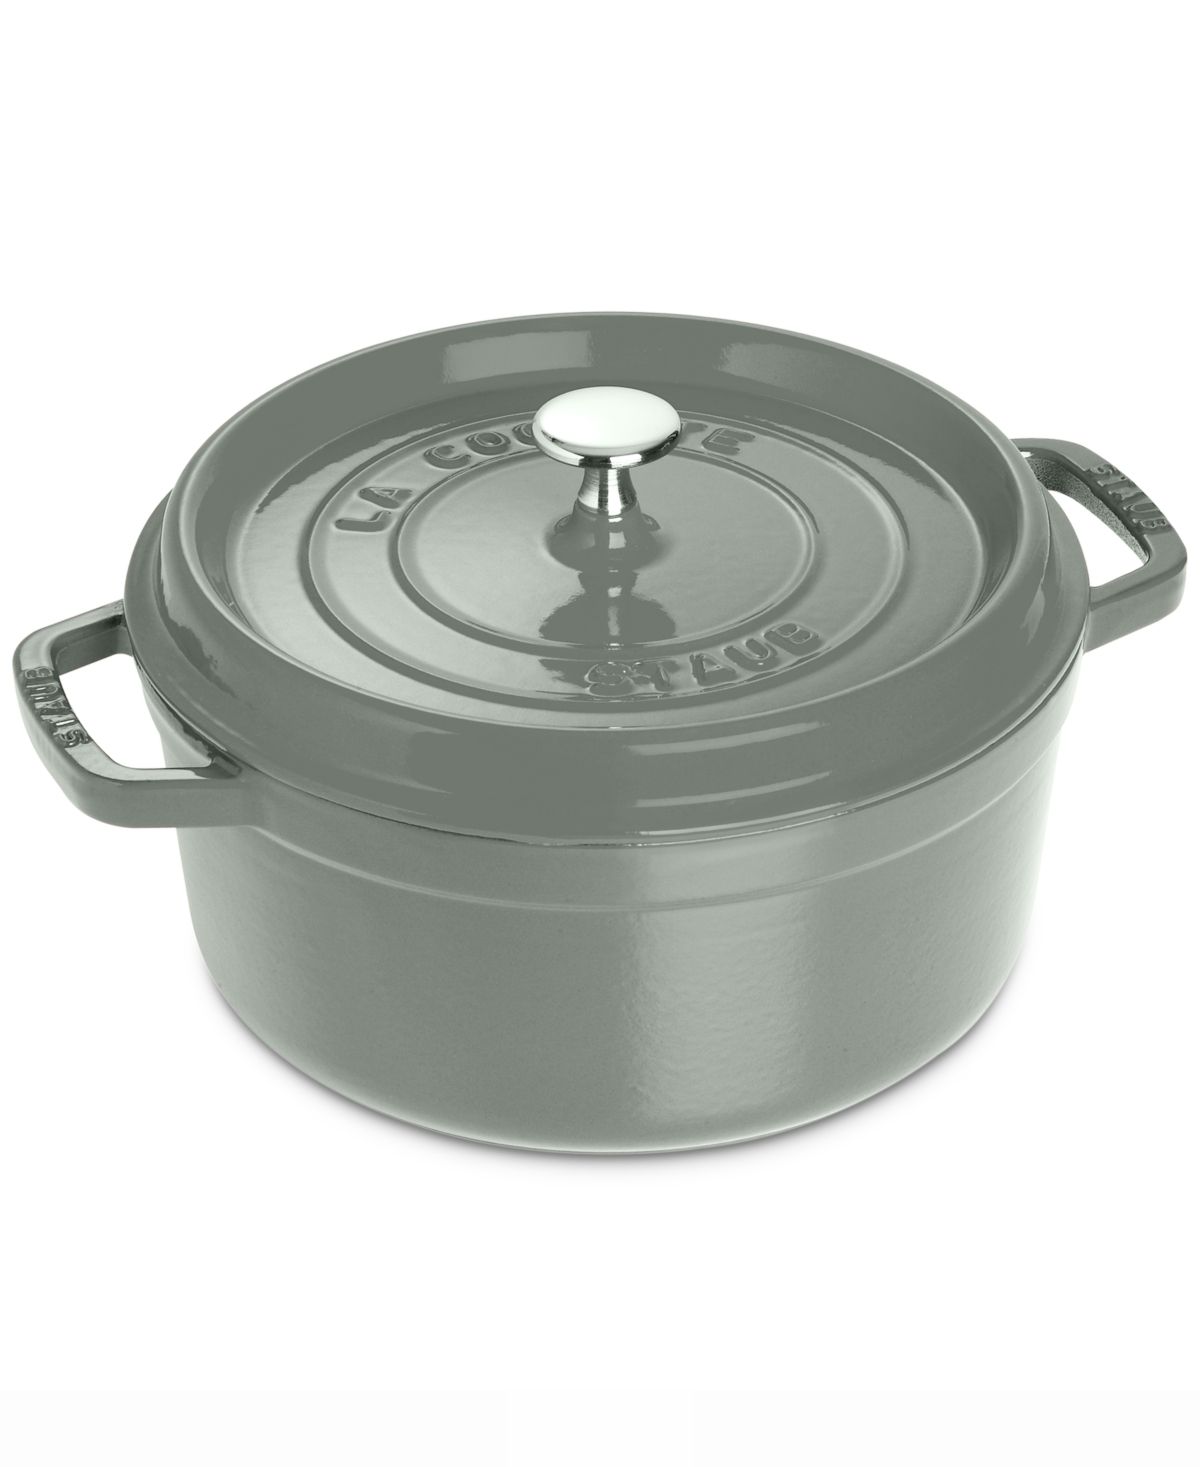 Staub Enameled Cast Iron 4-qt. Round Cocotte In Graphite Grey